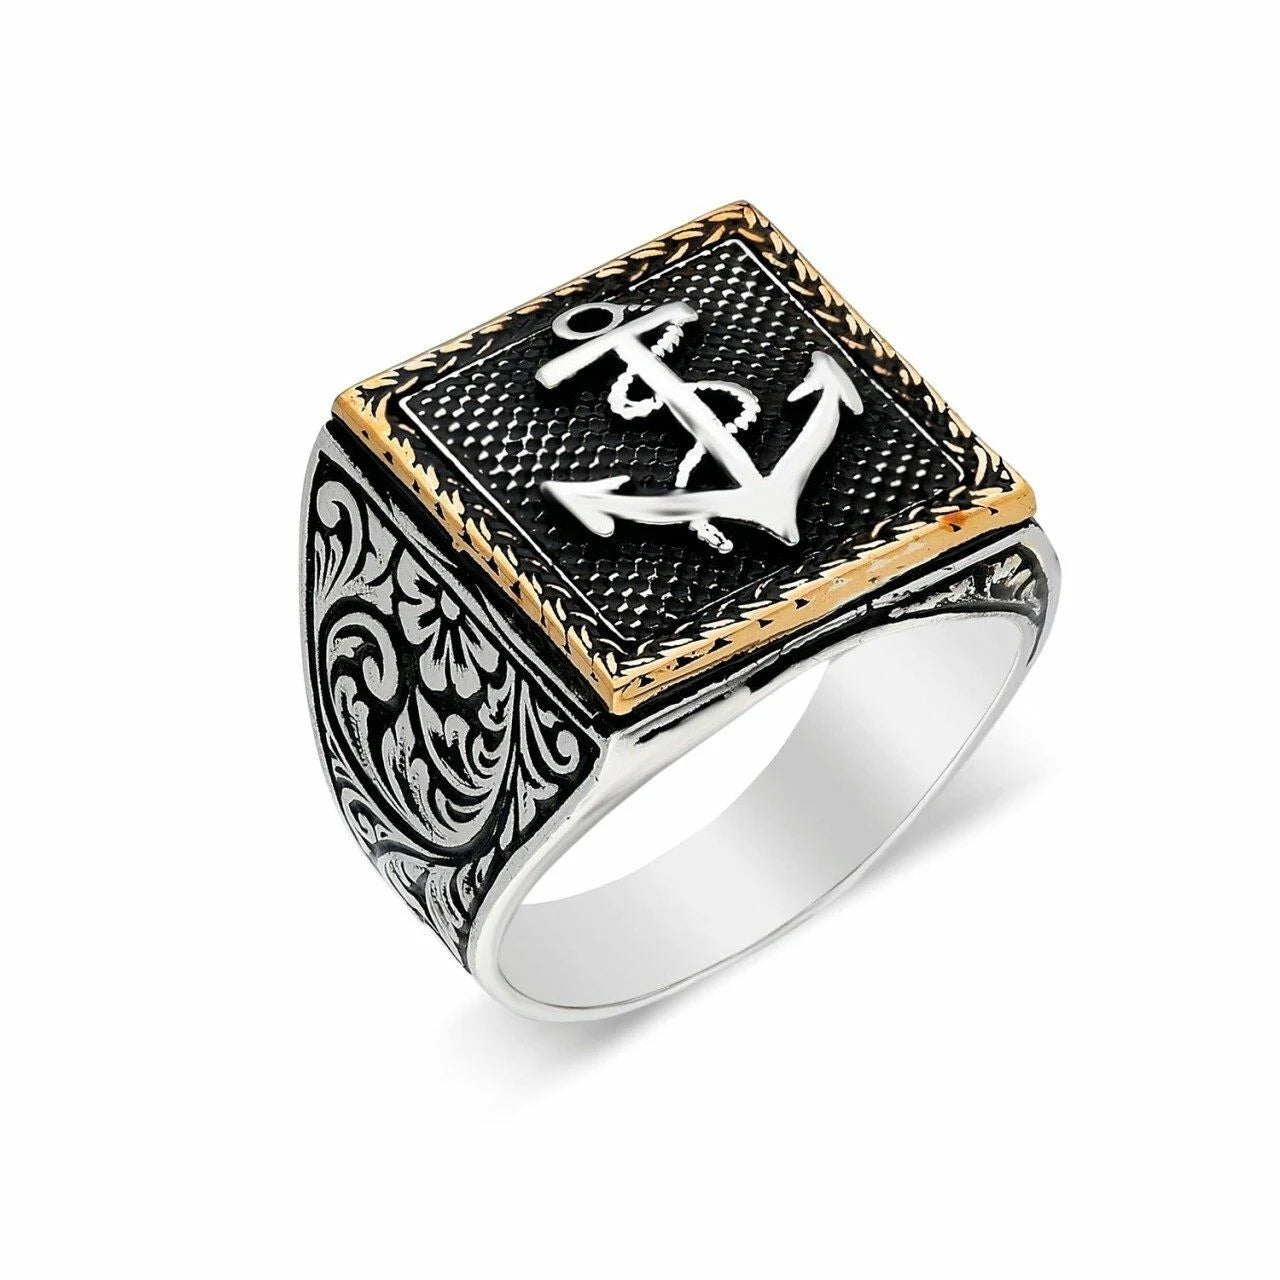 Anchor Ring - 925 Sterling Silver Square Maritime Design with Engraved Sides